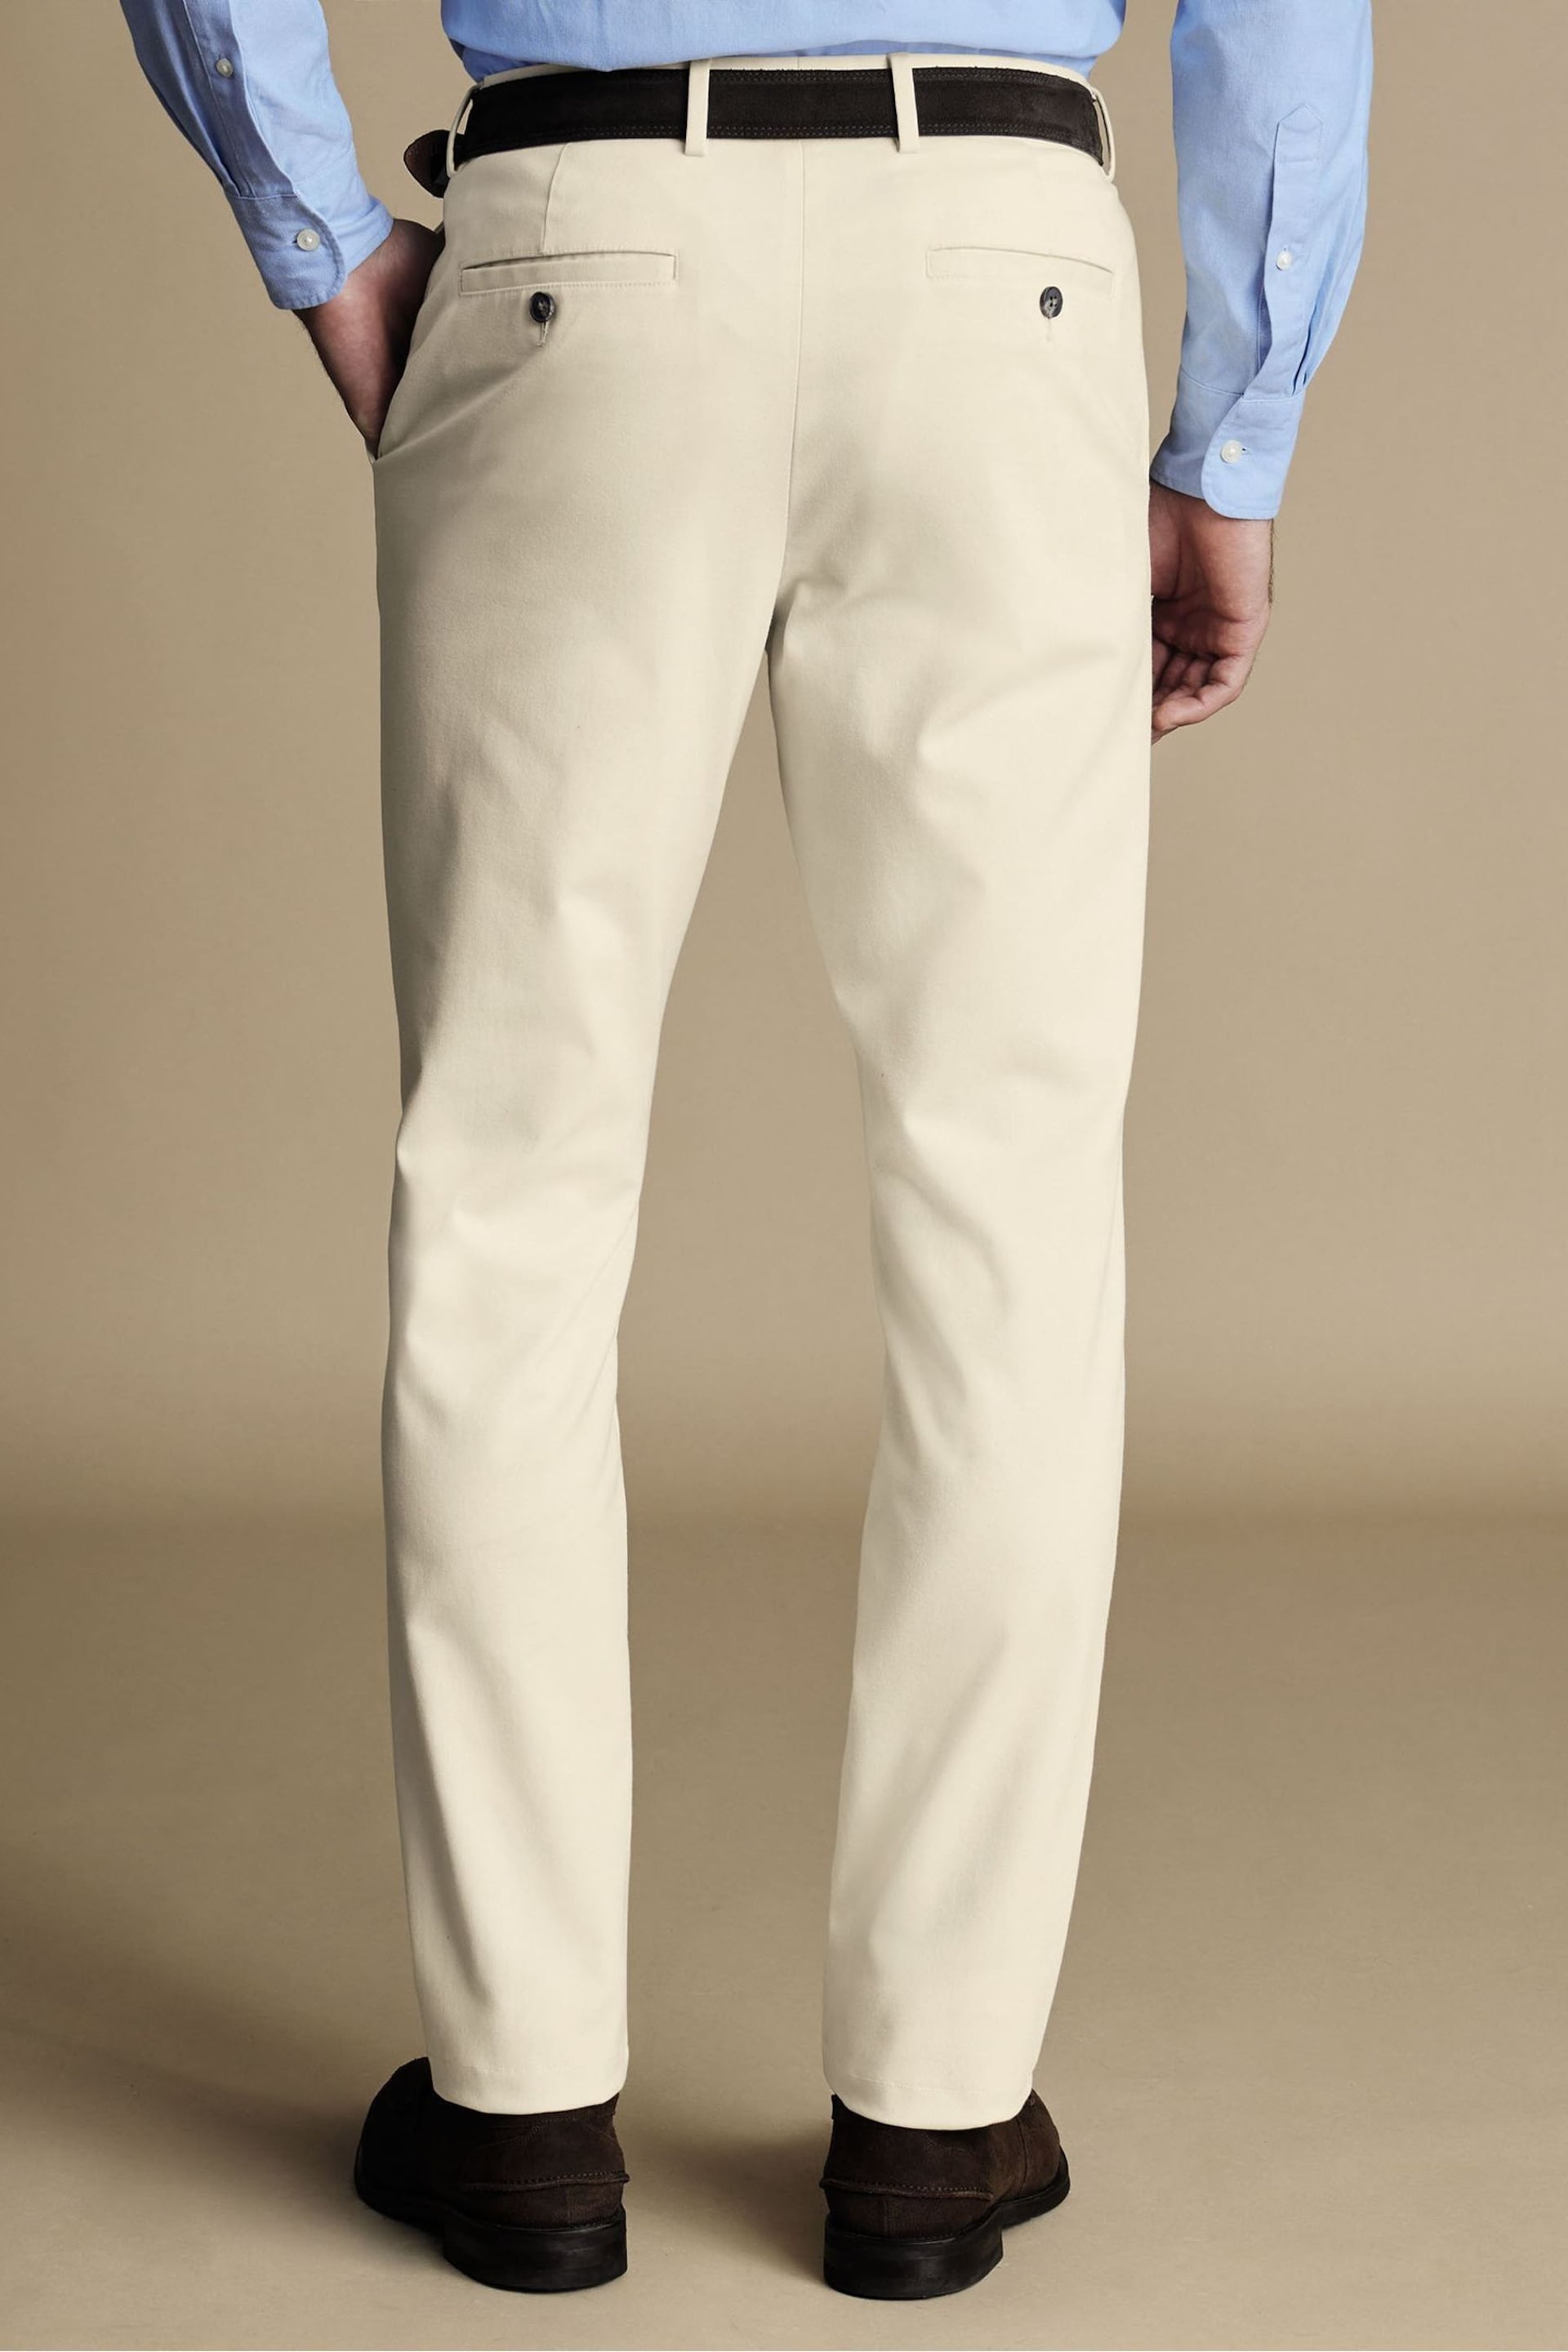 Charles Tyrwhitt Natural cream Classic Fit Ultimate non-iron Chino Trousers - Image 2 of 5